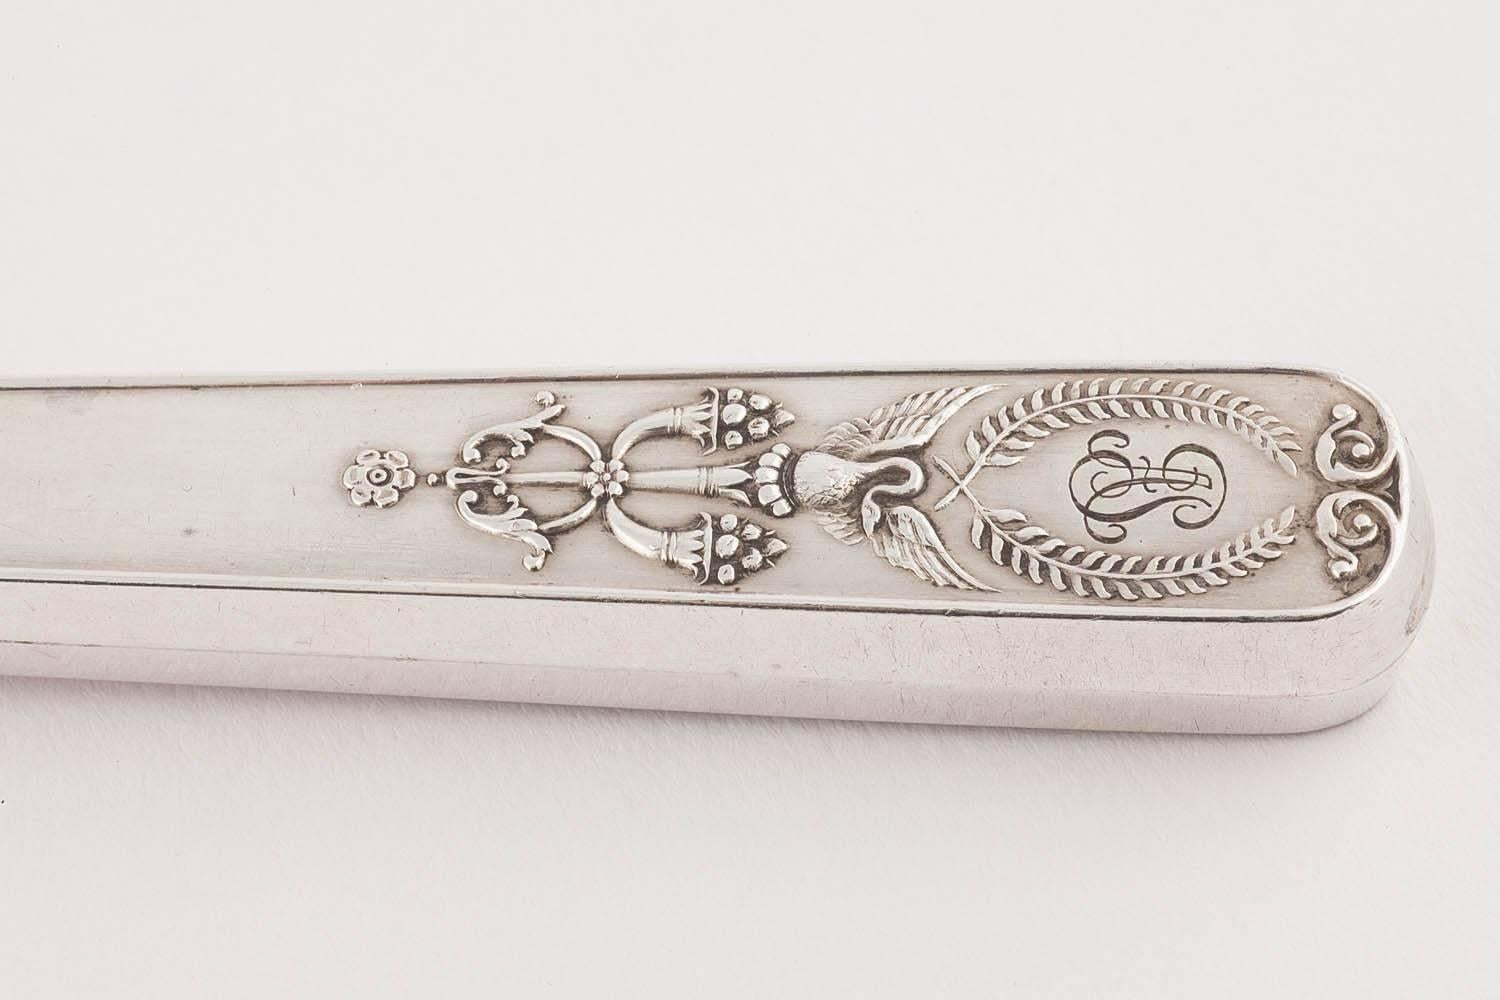 This attractive silver engraved fish service pair is from Fabergé's Moscow workshop at the turn-of-the-century. In the neoclassical taste, the handles are decorated with splayed swans, wreathes and cornucopiae, the fork and knife are engraved with